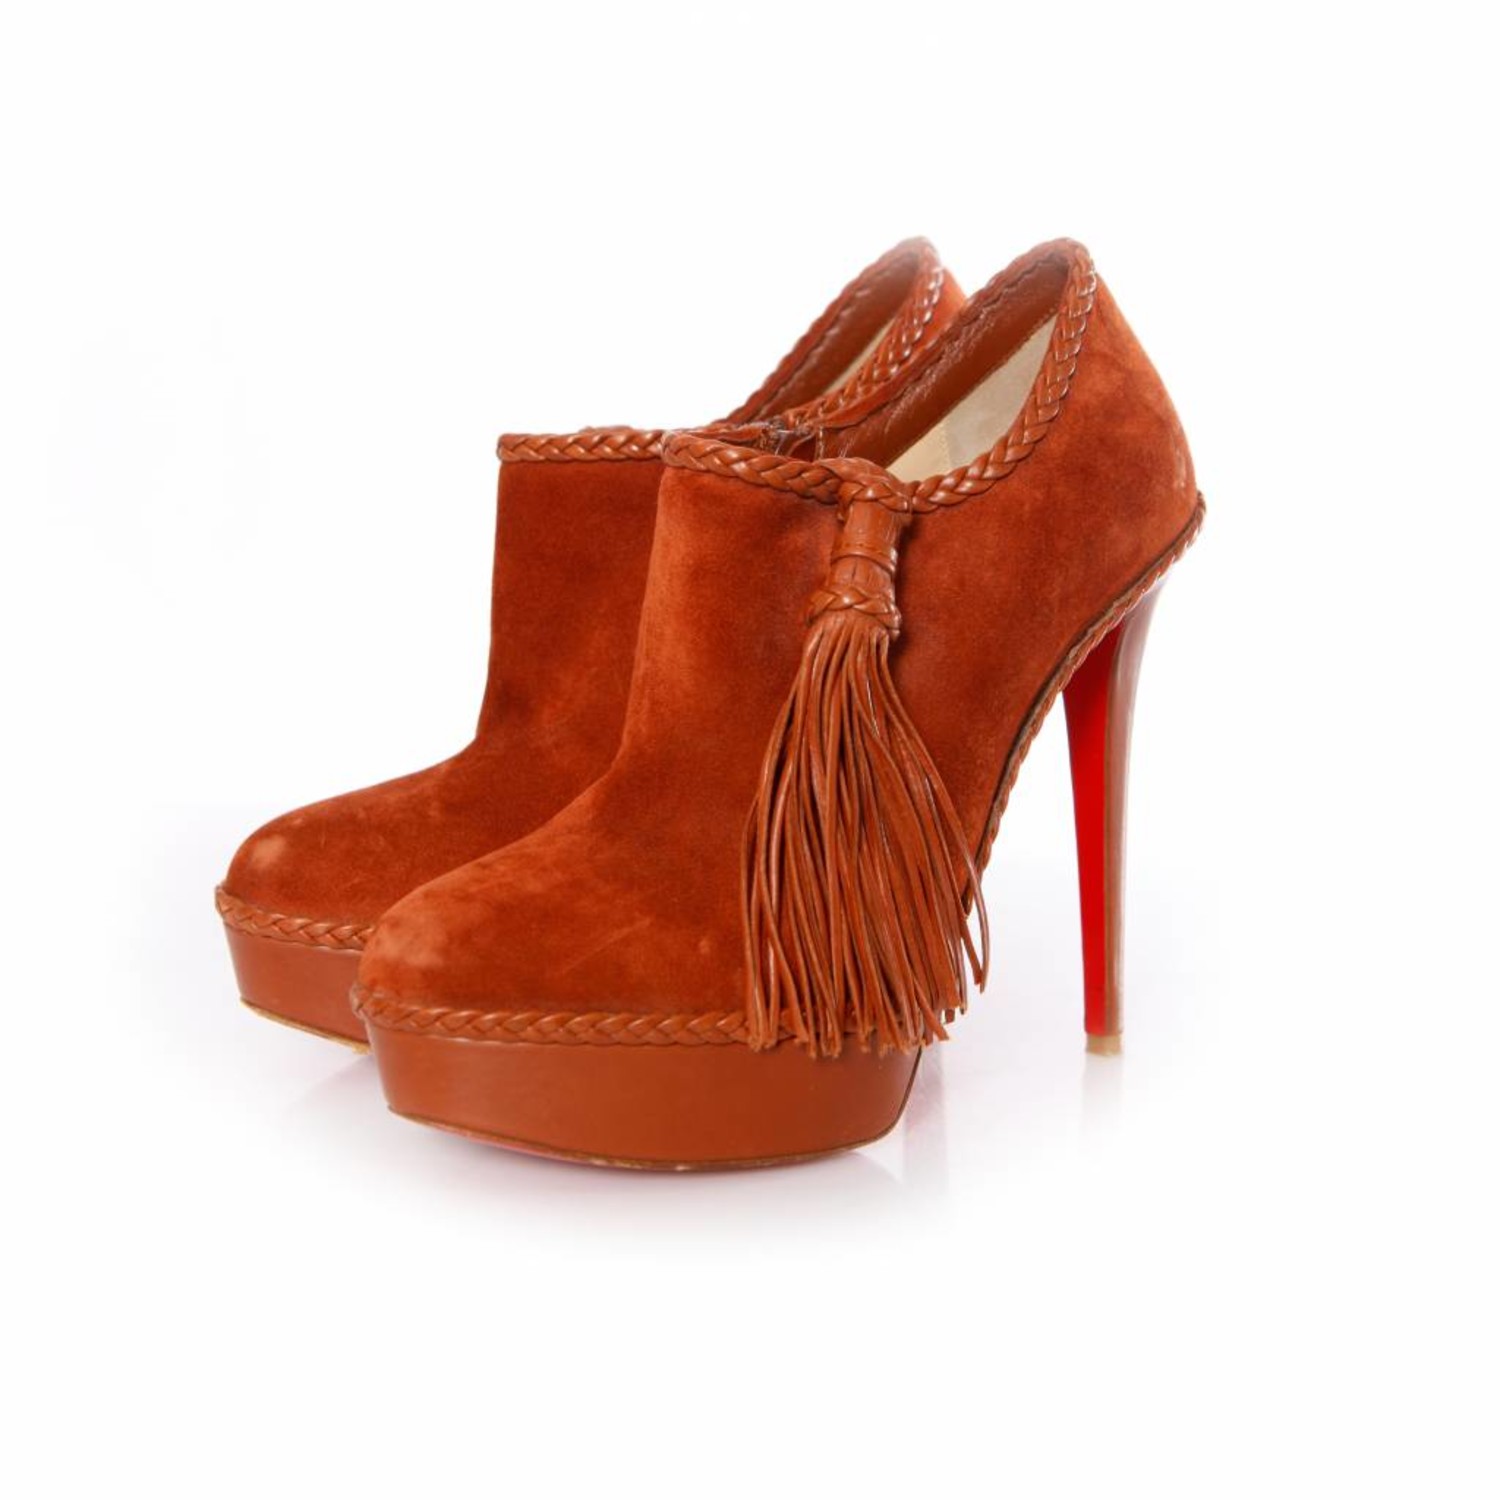 Designer ankle boots - Christian Louboutin